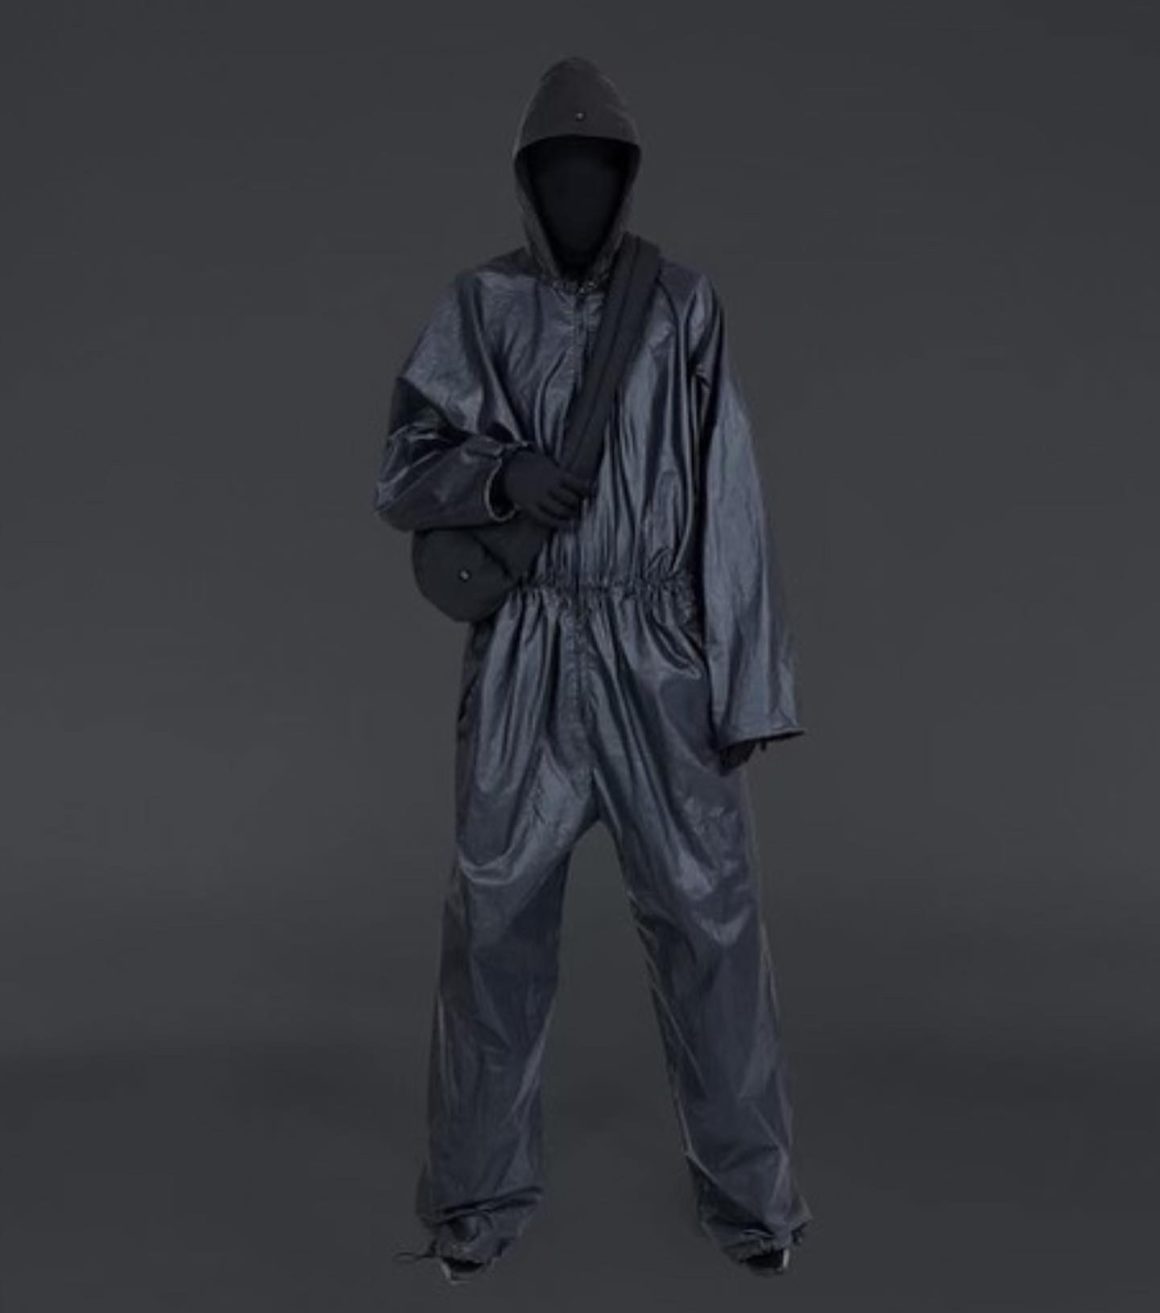 West Releases Images Cryptic Balenciaga x Gap Collection (Black Parkas, Jumpsuits, and Boots)